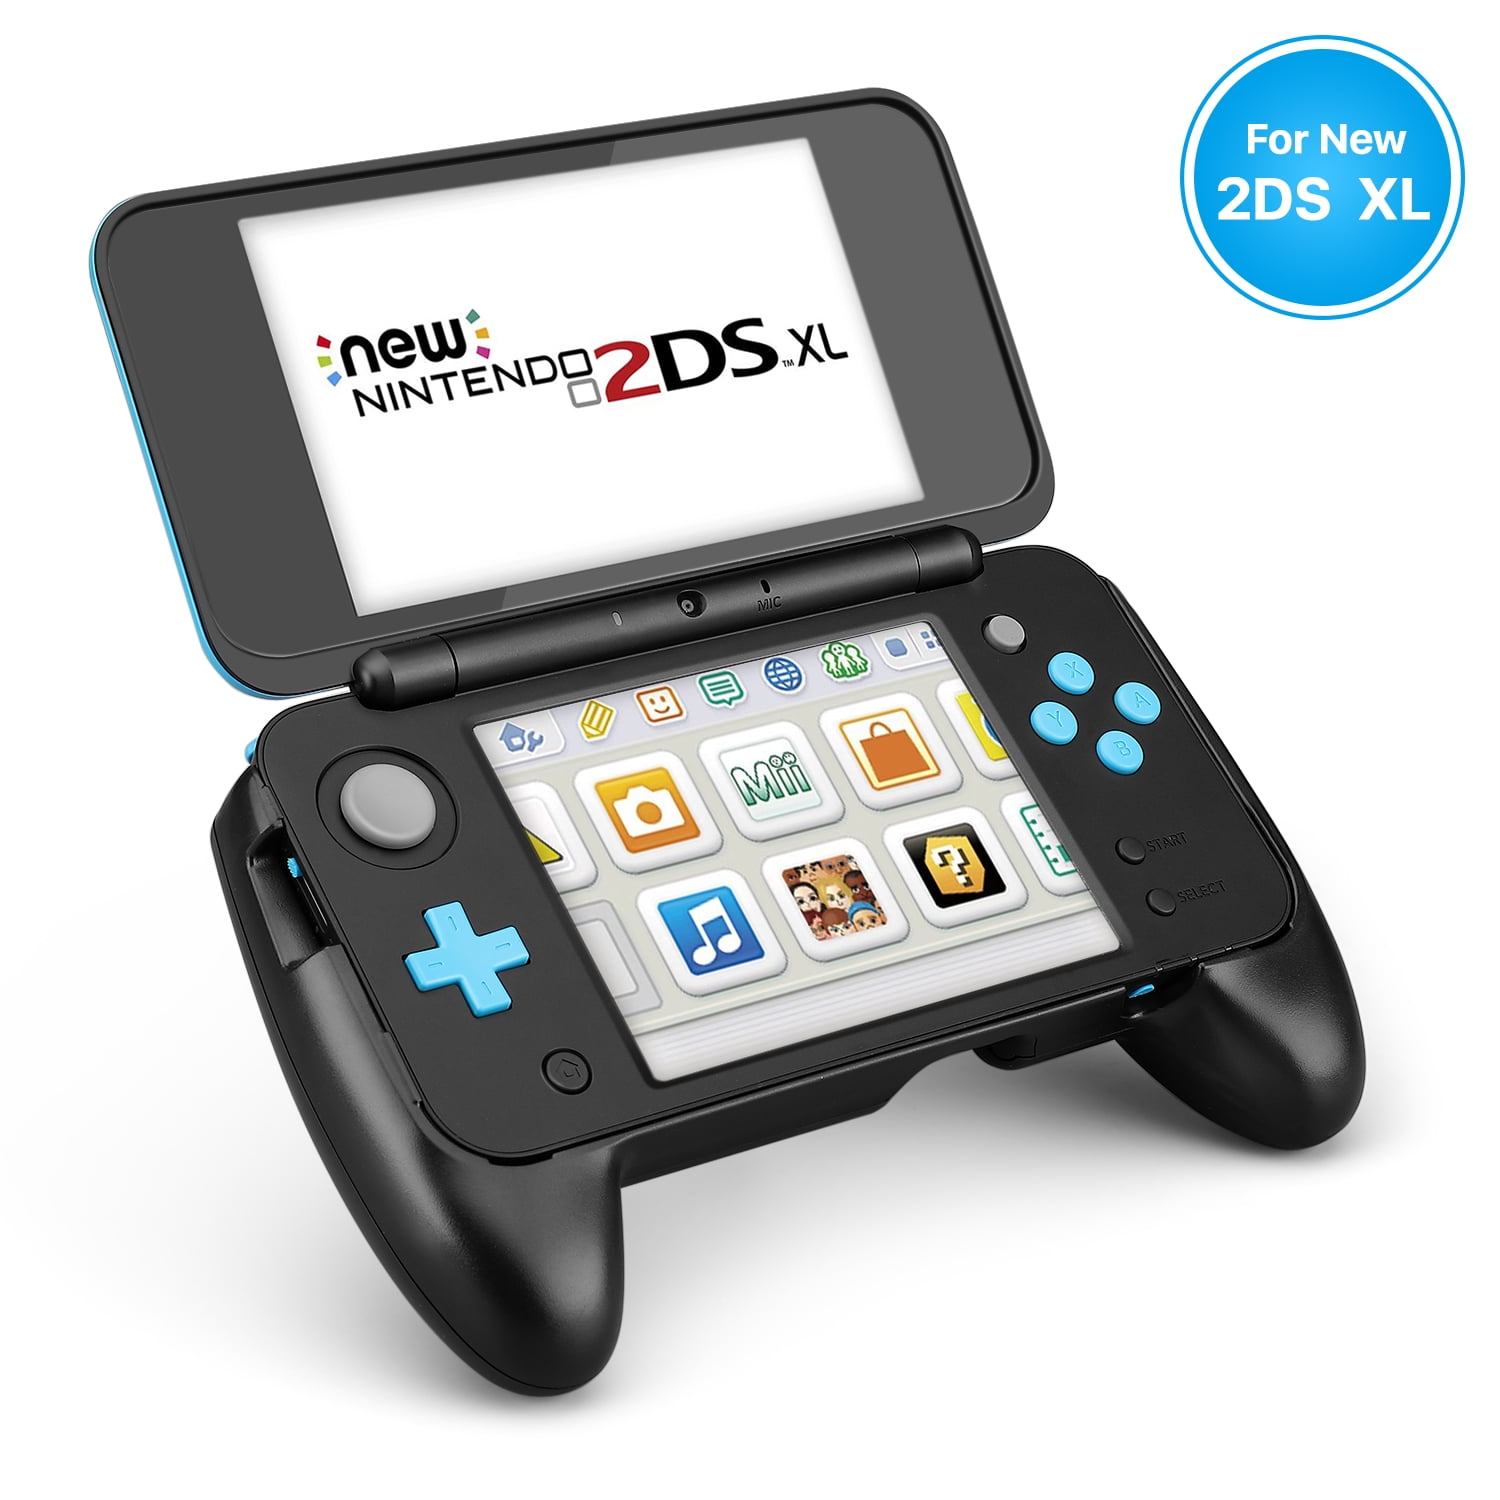 New Nintendo 2ds Xl Hand Grip Protective Cover Skin Rubber Controller Grip Case Ergonomic Comfort Anti Slip Handle Console Grip With Kick Stand For New Nintendo 2ds Xl Ll 17 Model